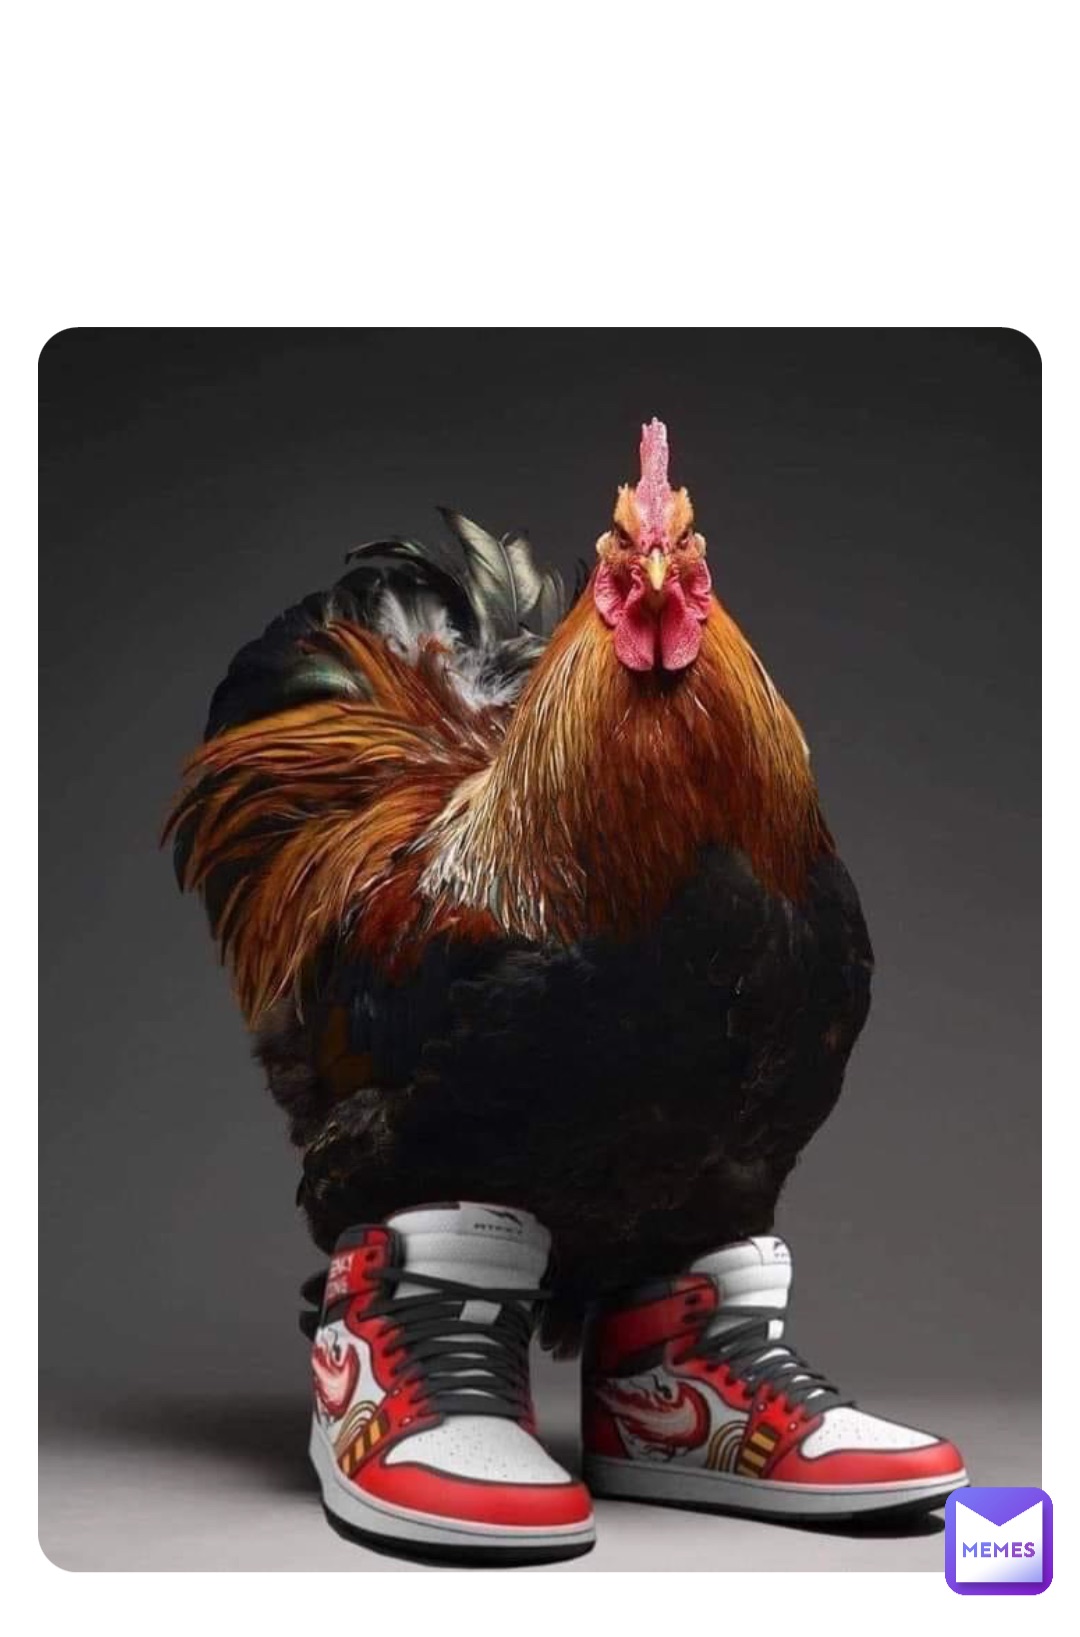 Discover more than 150 chicken wearing sneakers best